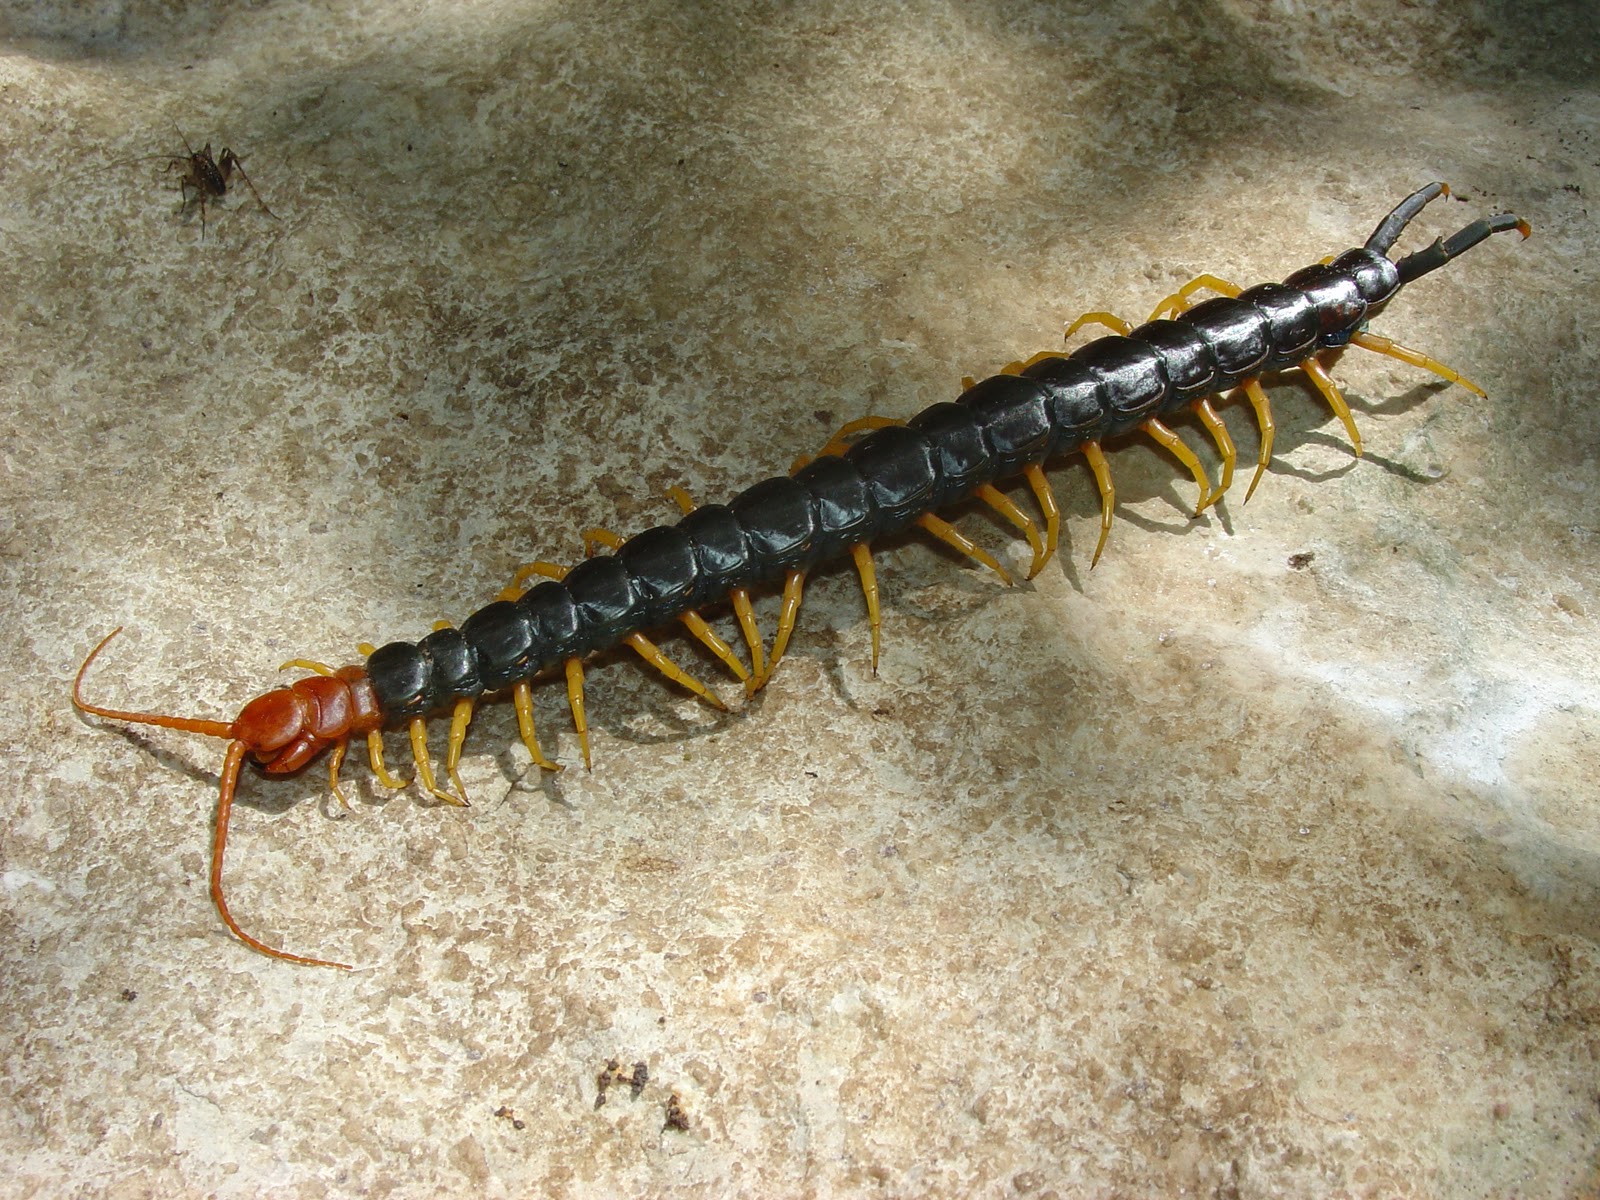 red headed centipede swallows